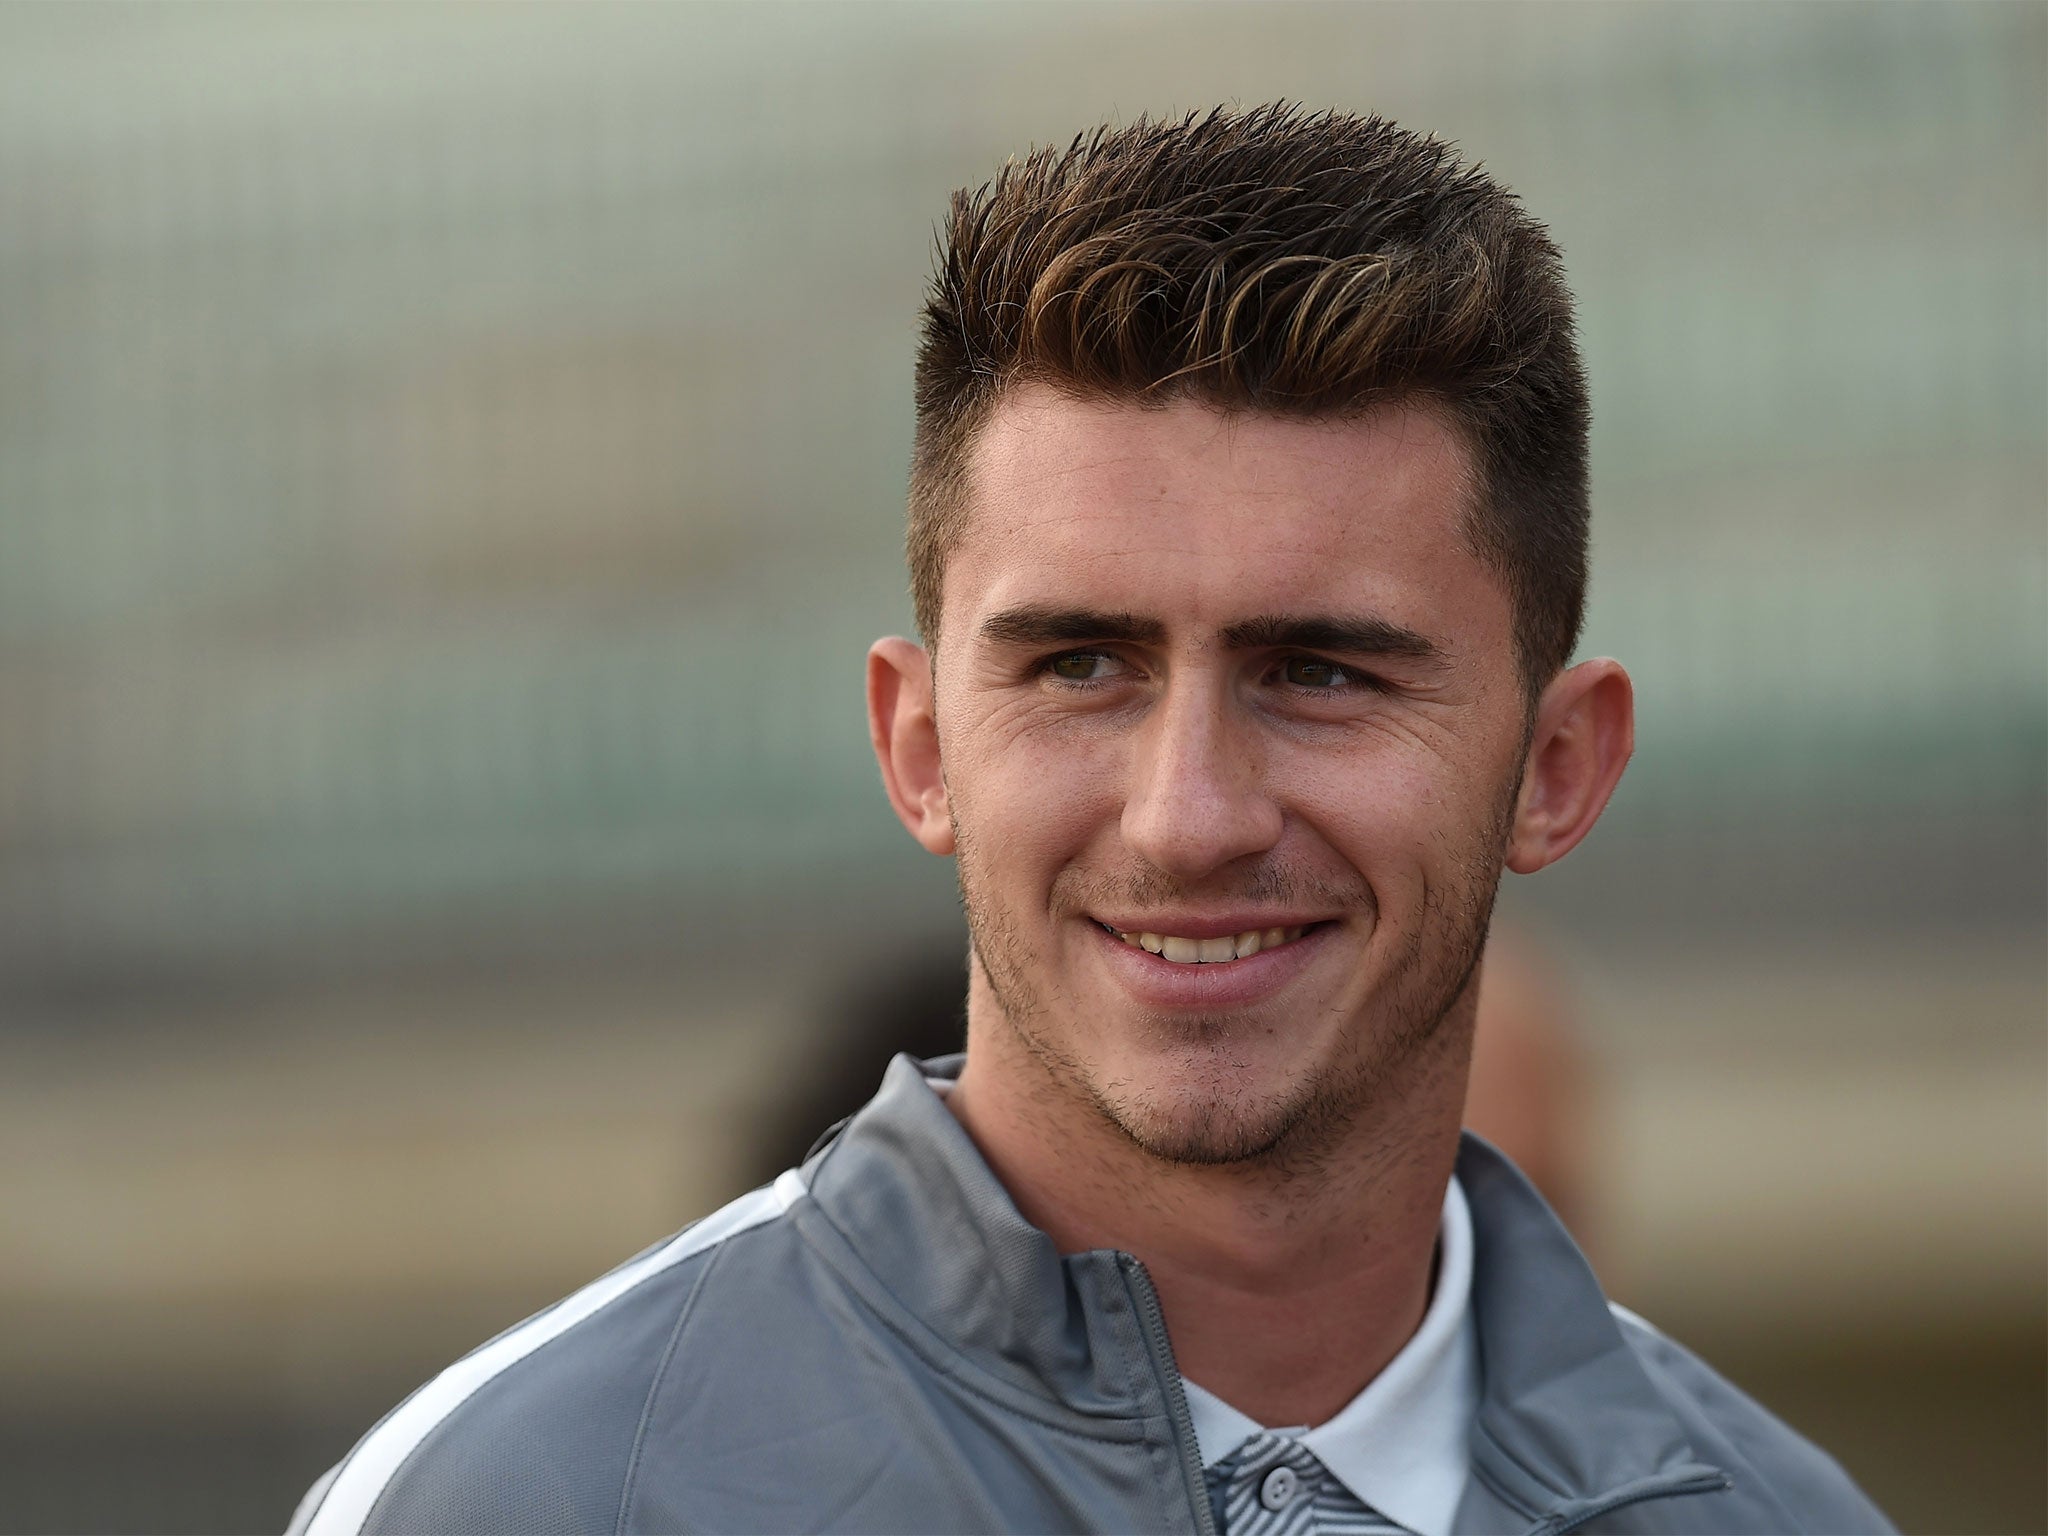 Aymeric Laporte is likely to be a Manchester City player shortly